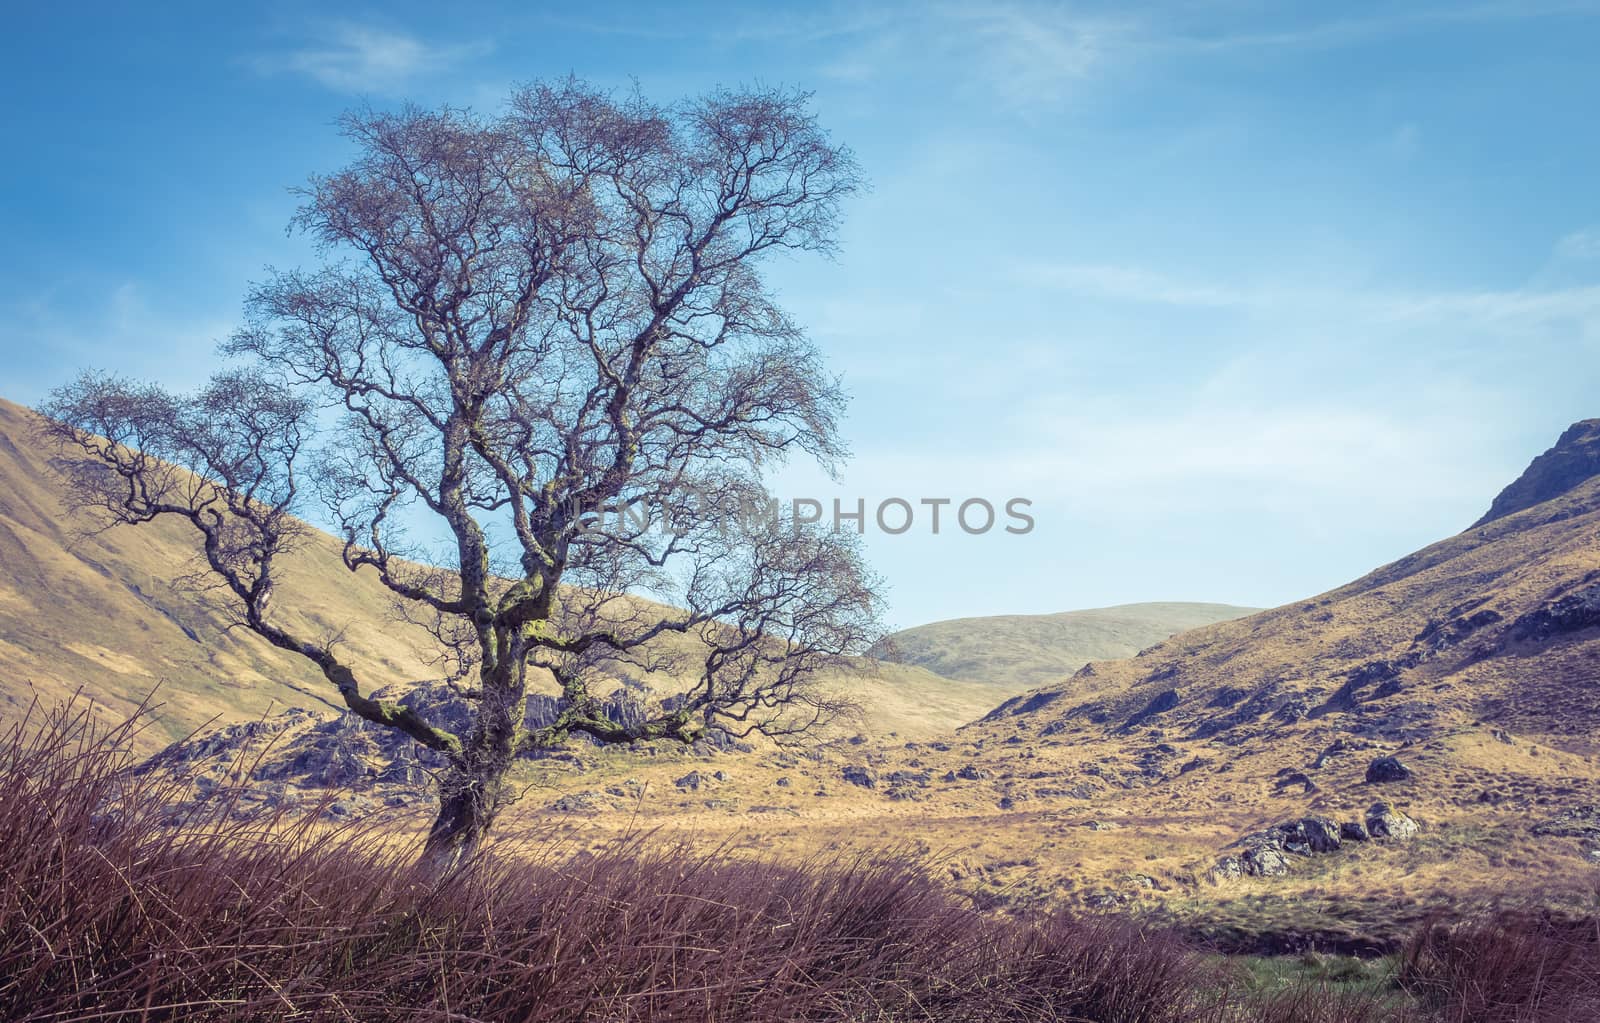 Barren Dry And Rocky Landscape Wilderness With A Single Tree In The Scottish Borders